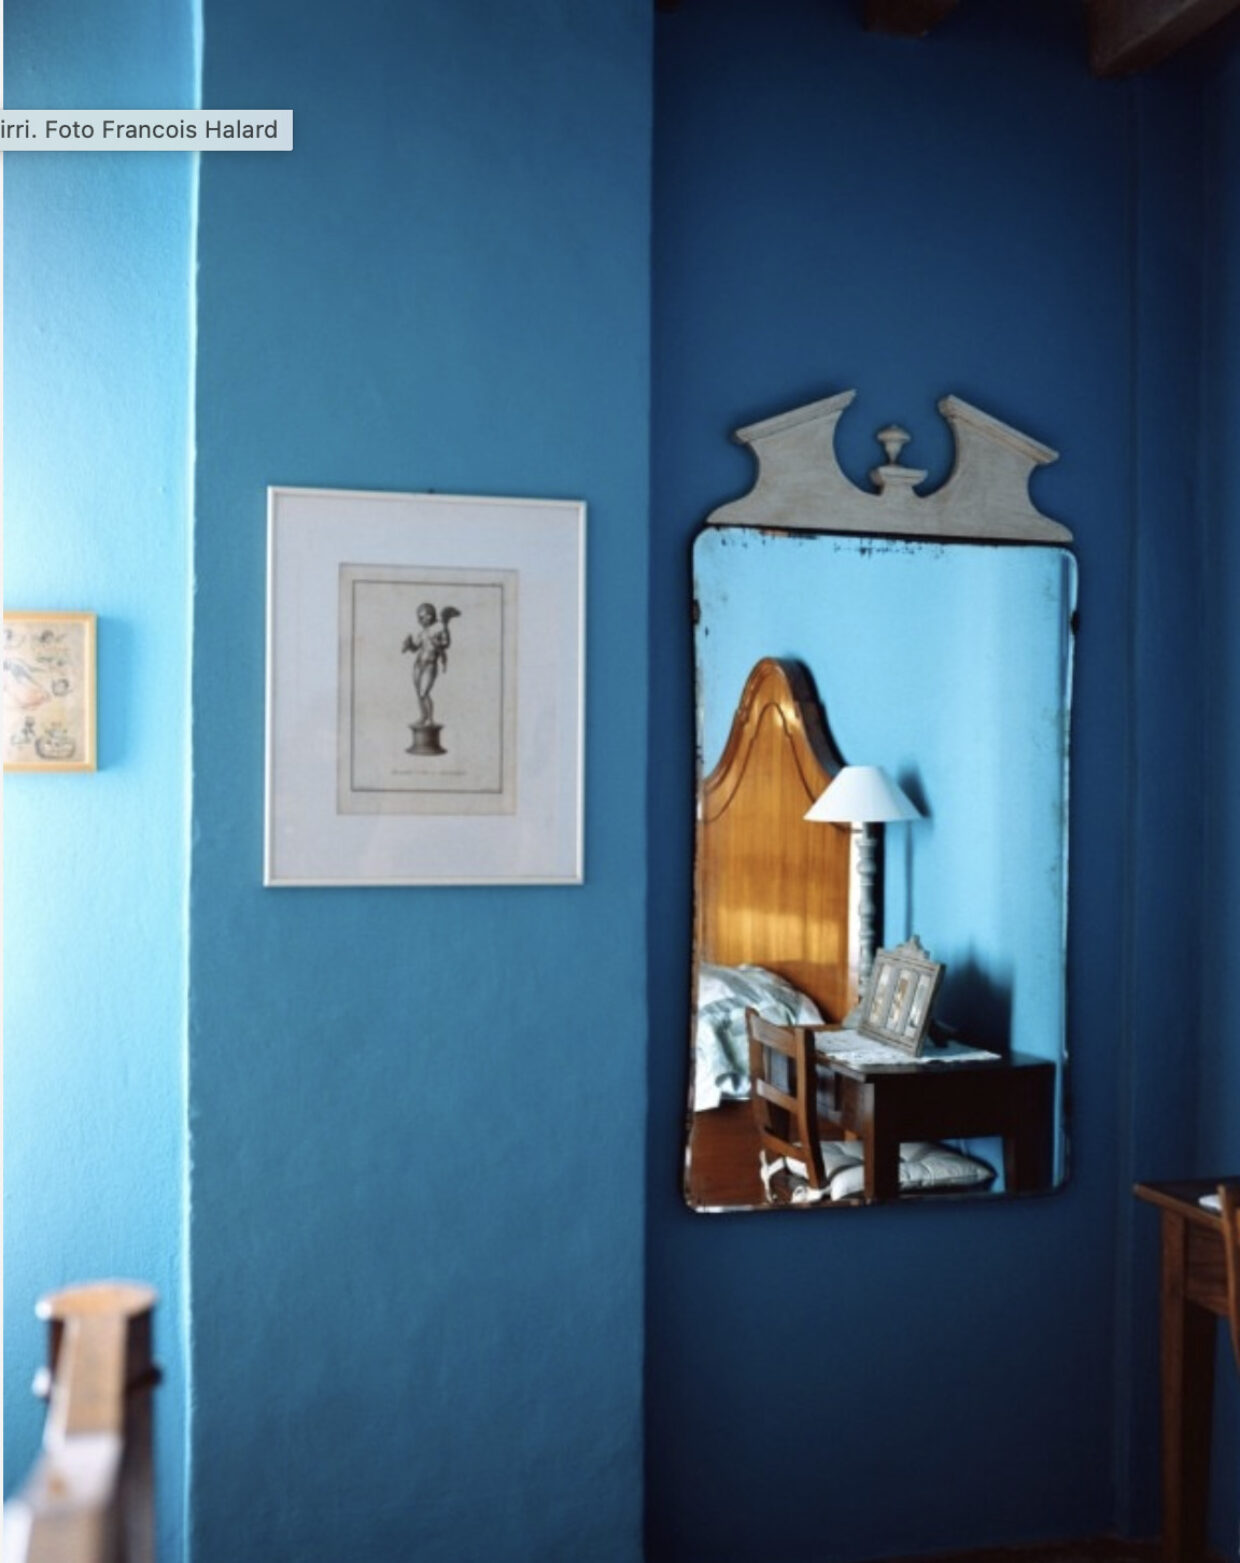 At Francois Halard’s house, master of interior and architectural photography | 4